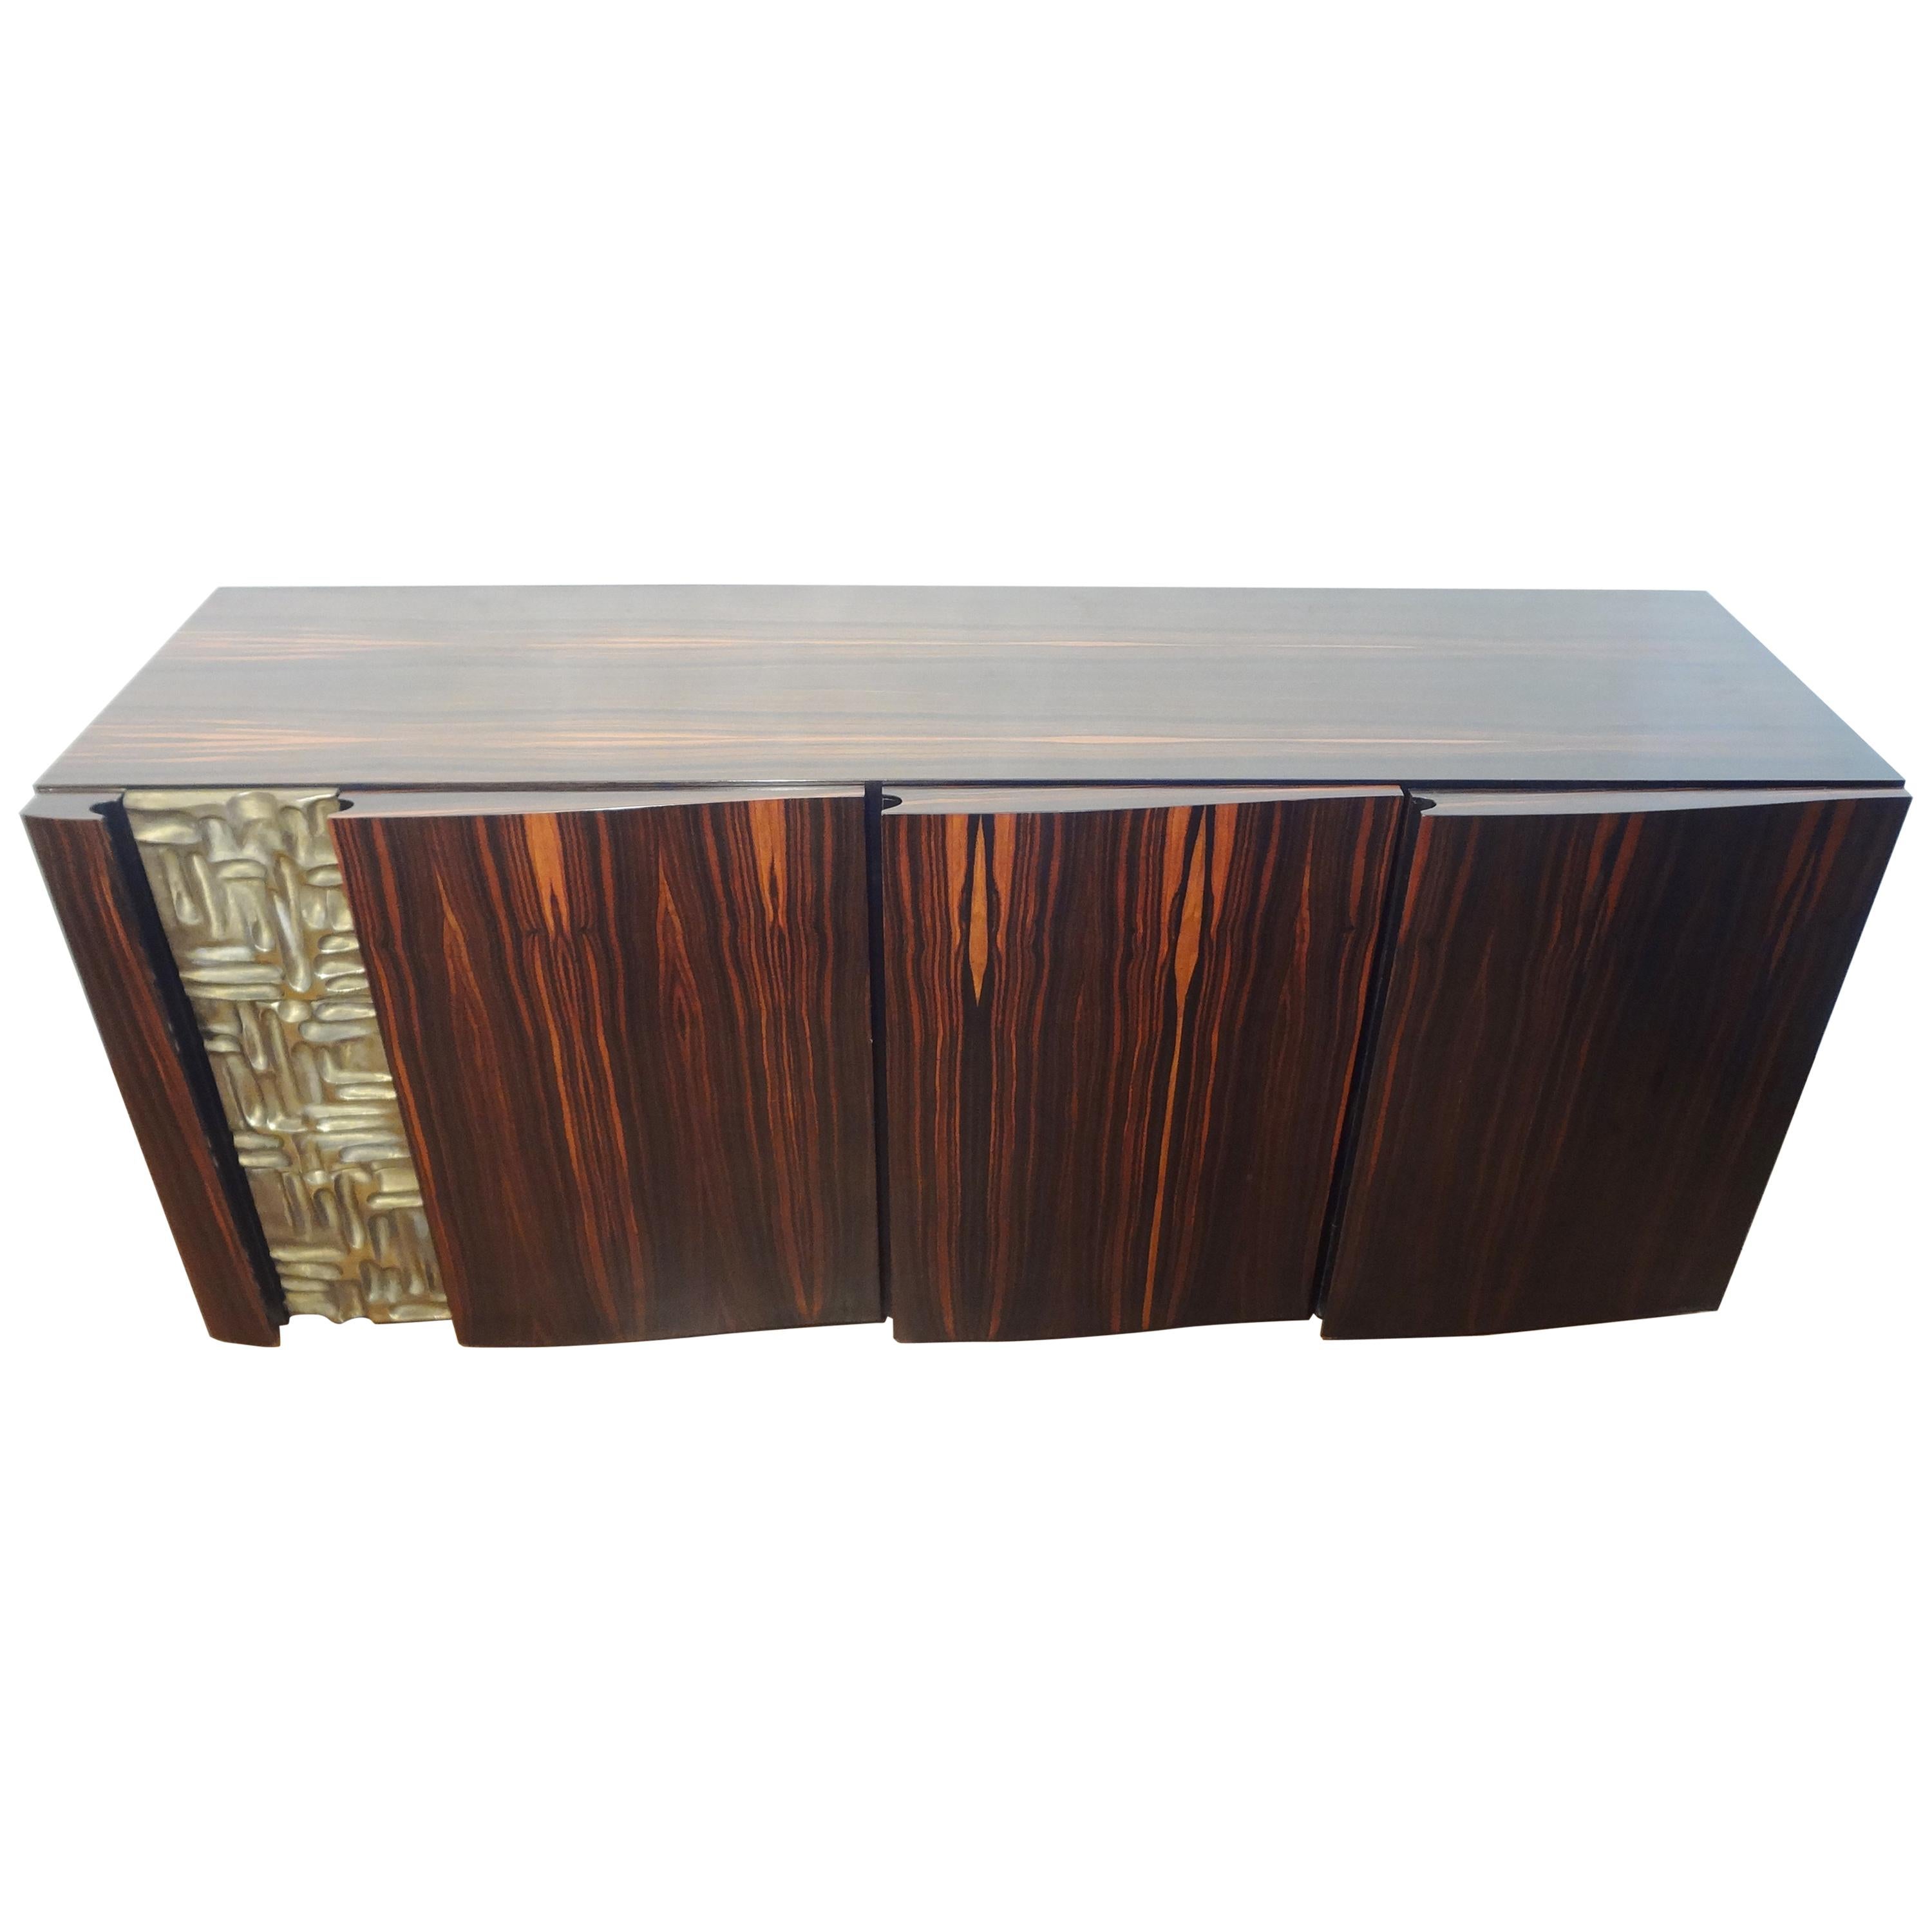 Beautiful Macassar Ebony and Bronze Sideboard by L. Frigerio, circa 1975 For Sale